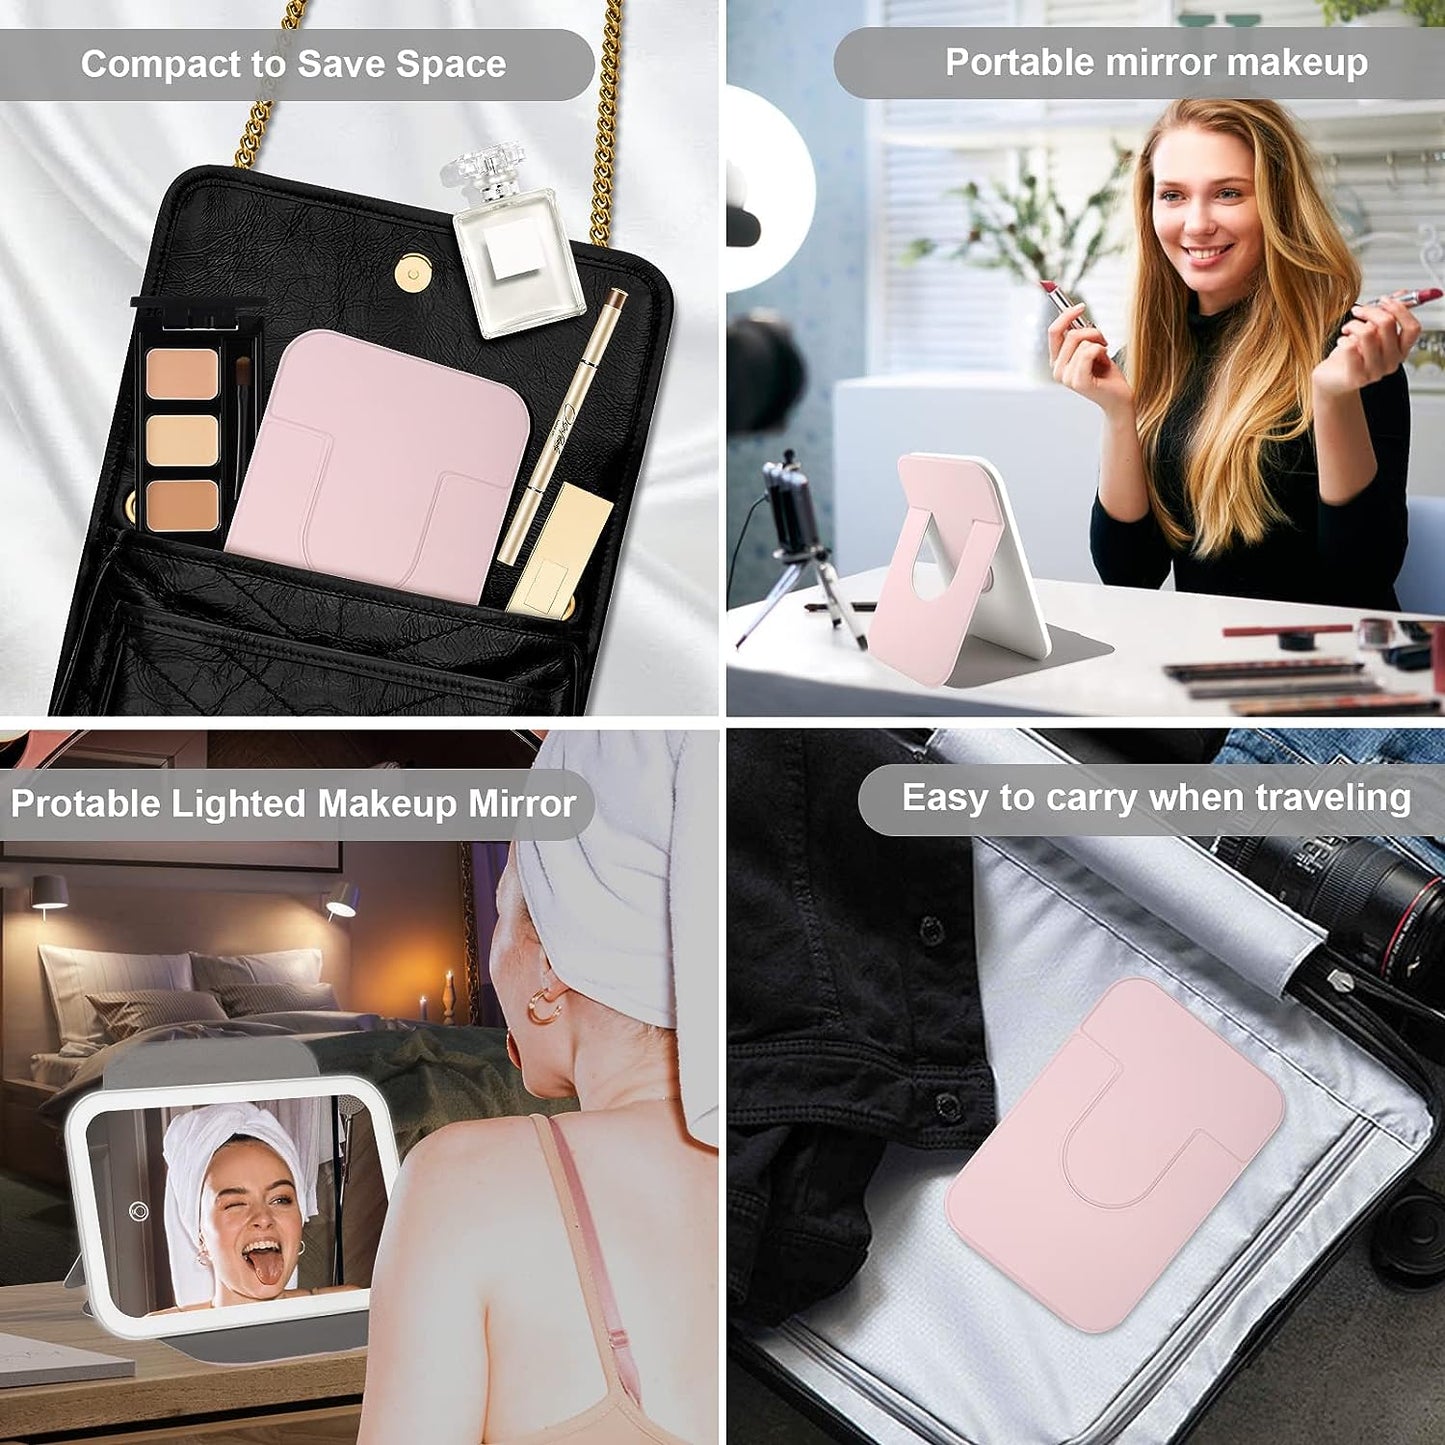 Portable Travel Lighted Makeup Mirror with 3 Color Lights, USB Rechargeable Compact Vanity Mirror, Dimmable Touch Screen and 360° Rotatable Lighted Beauty Mirror, LED Folding Cosmetic Mirror